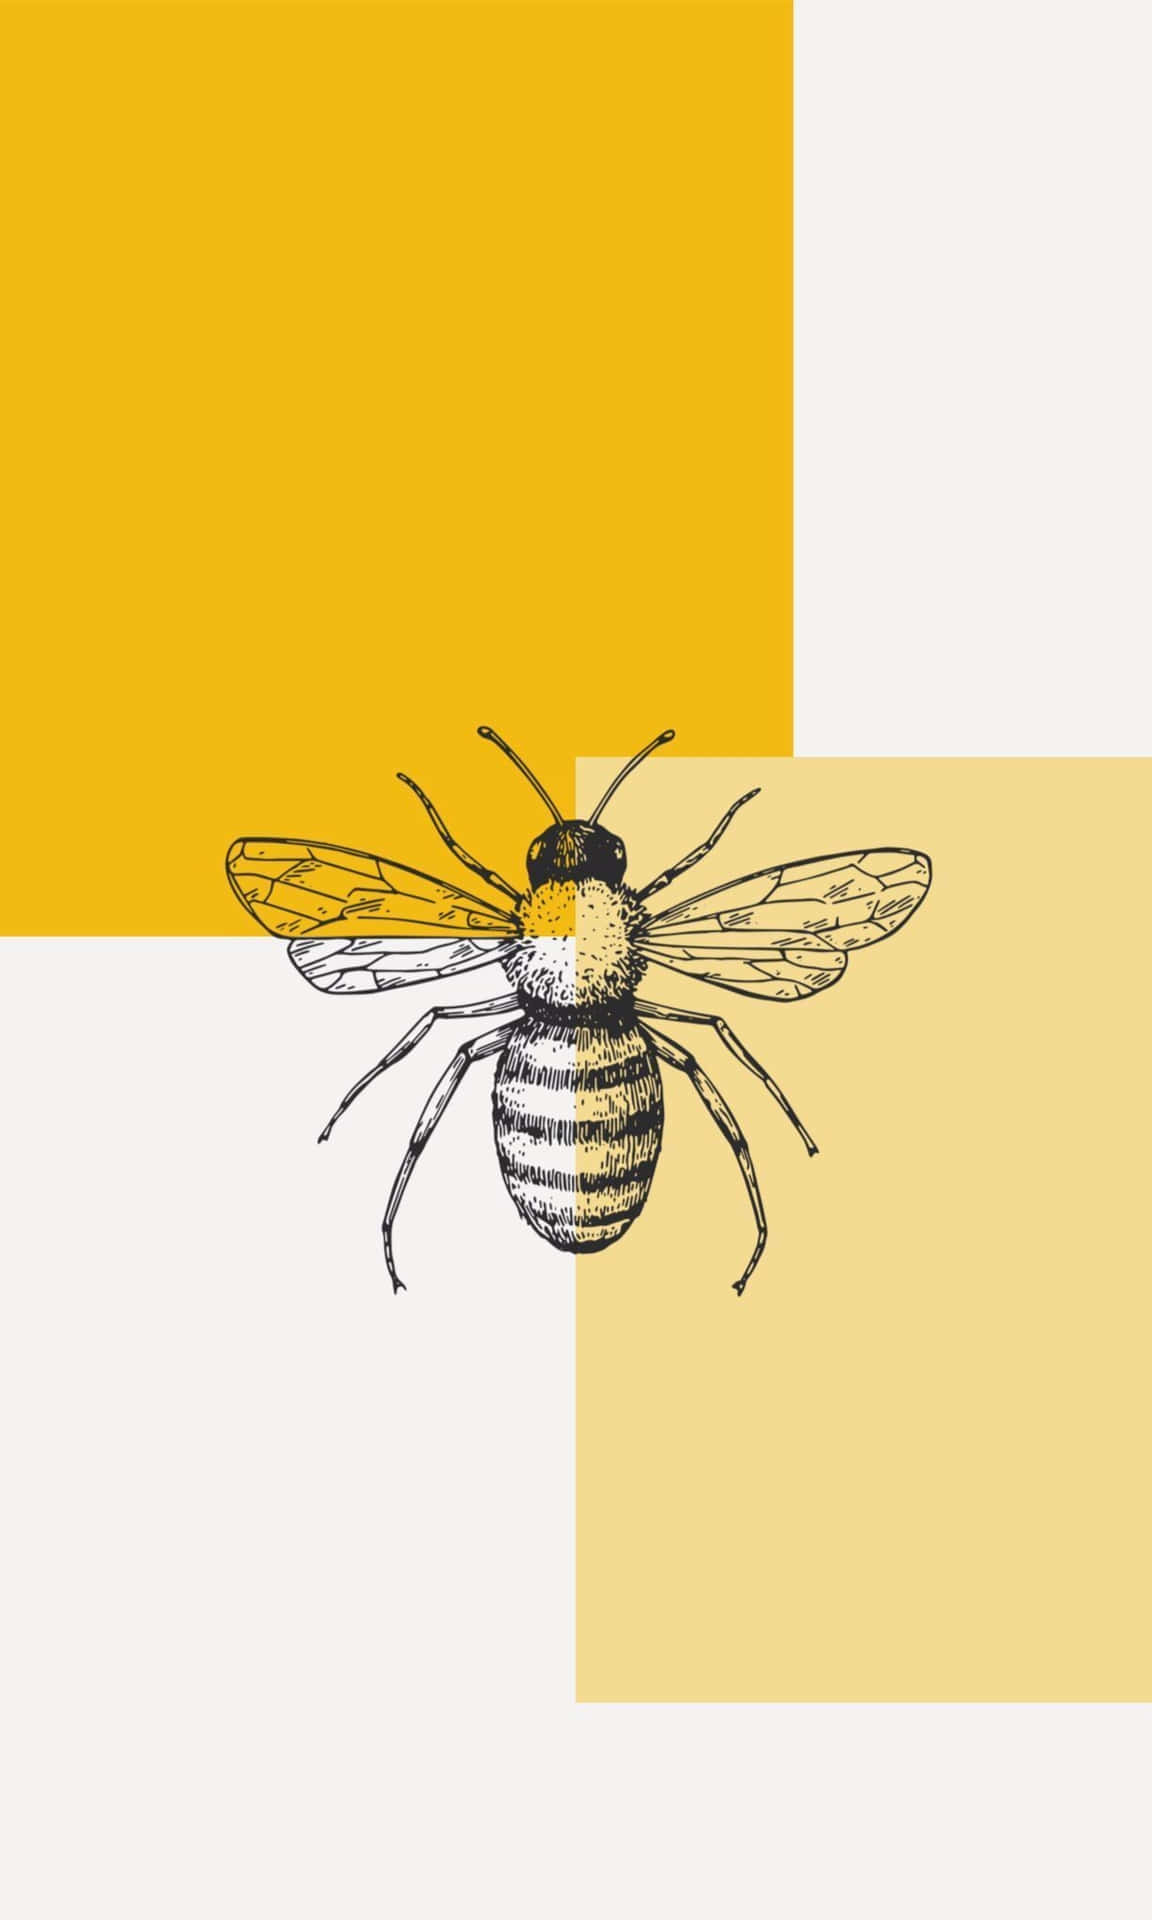 Majestic Aesthetic Bee on a Sunny Day Wallpaper